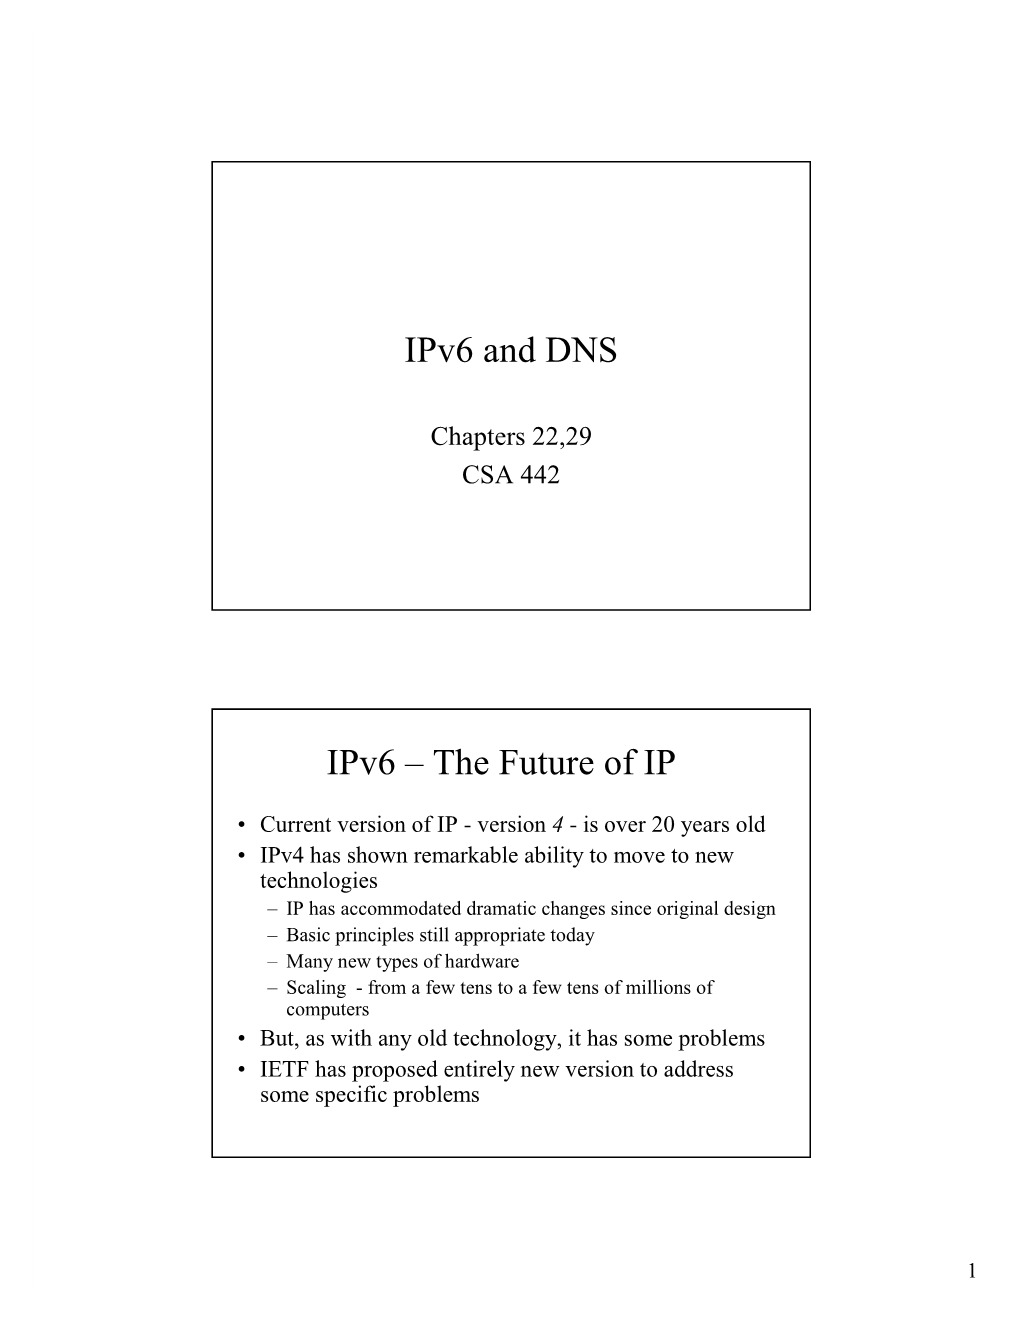 Ipv6 and DNS Ipv6 – the Future of IP